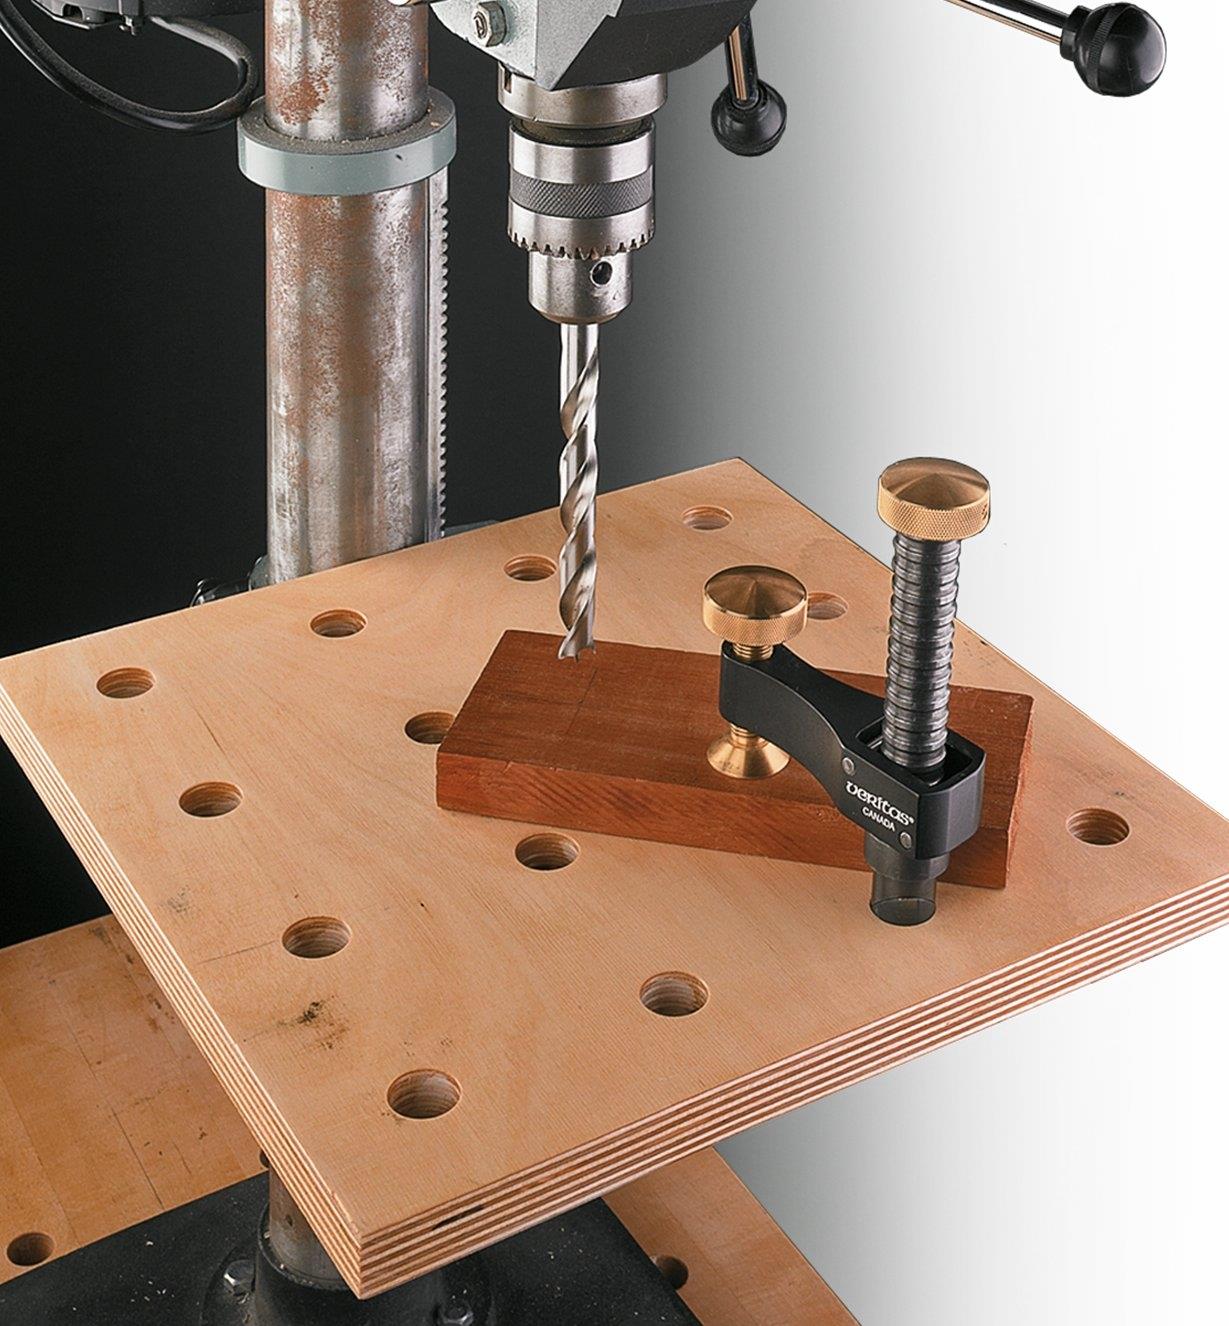 Veritas Surface Clamp holding a workpiece on a drill press table